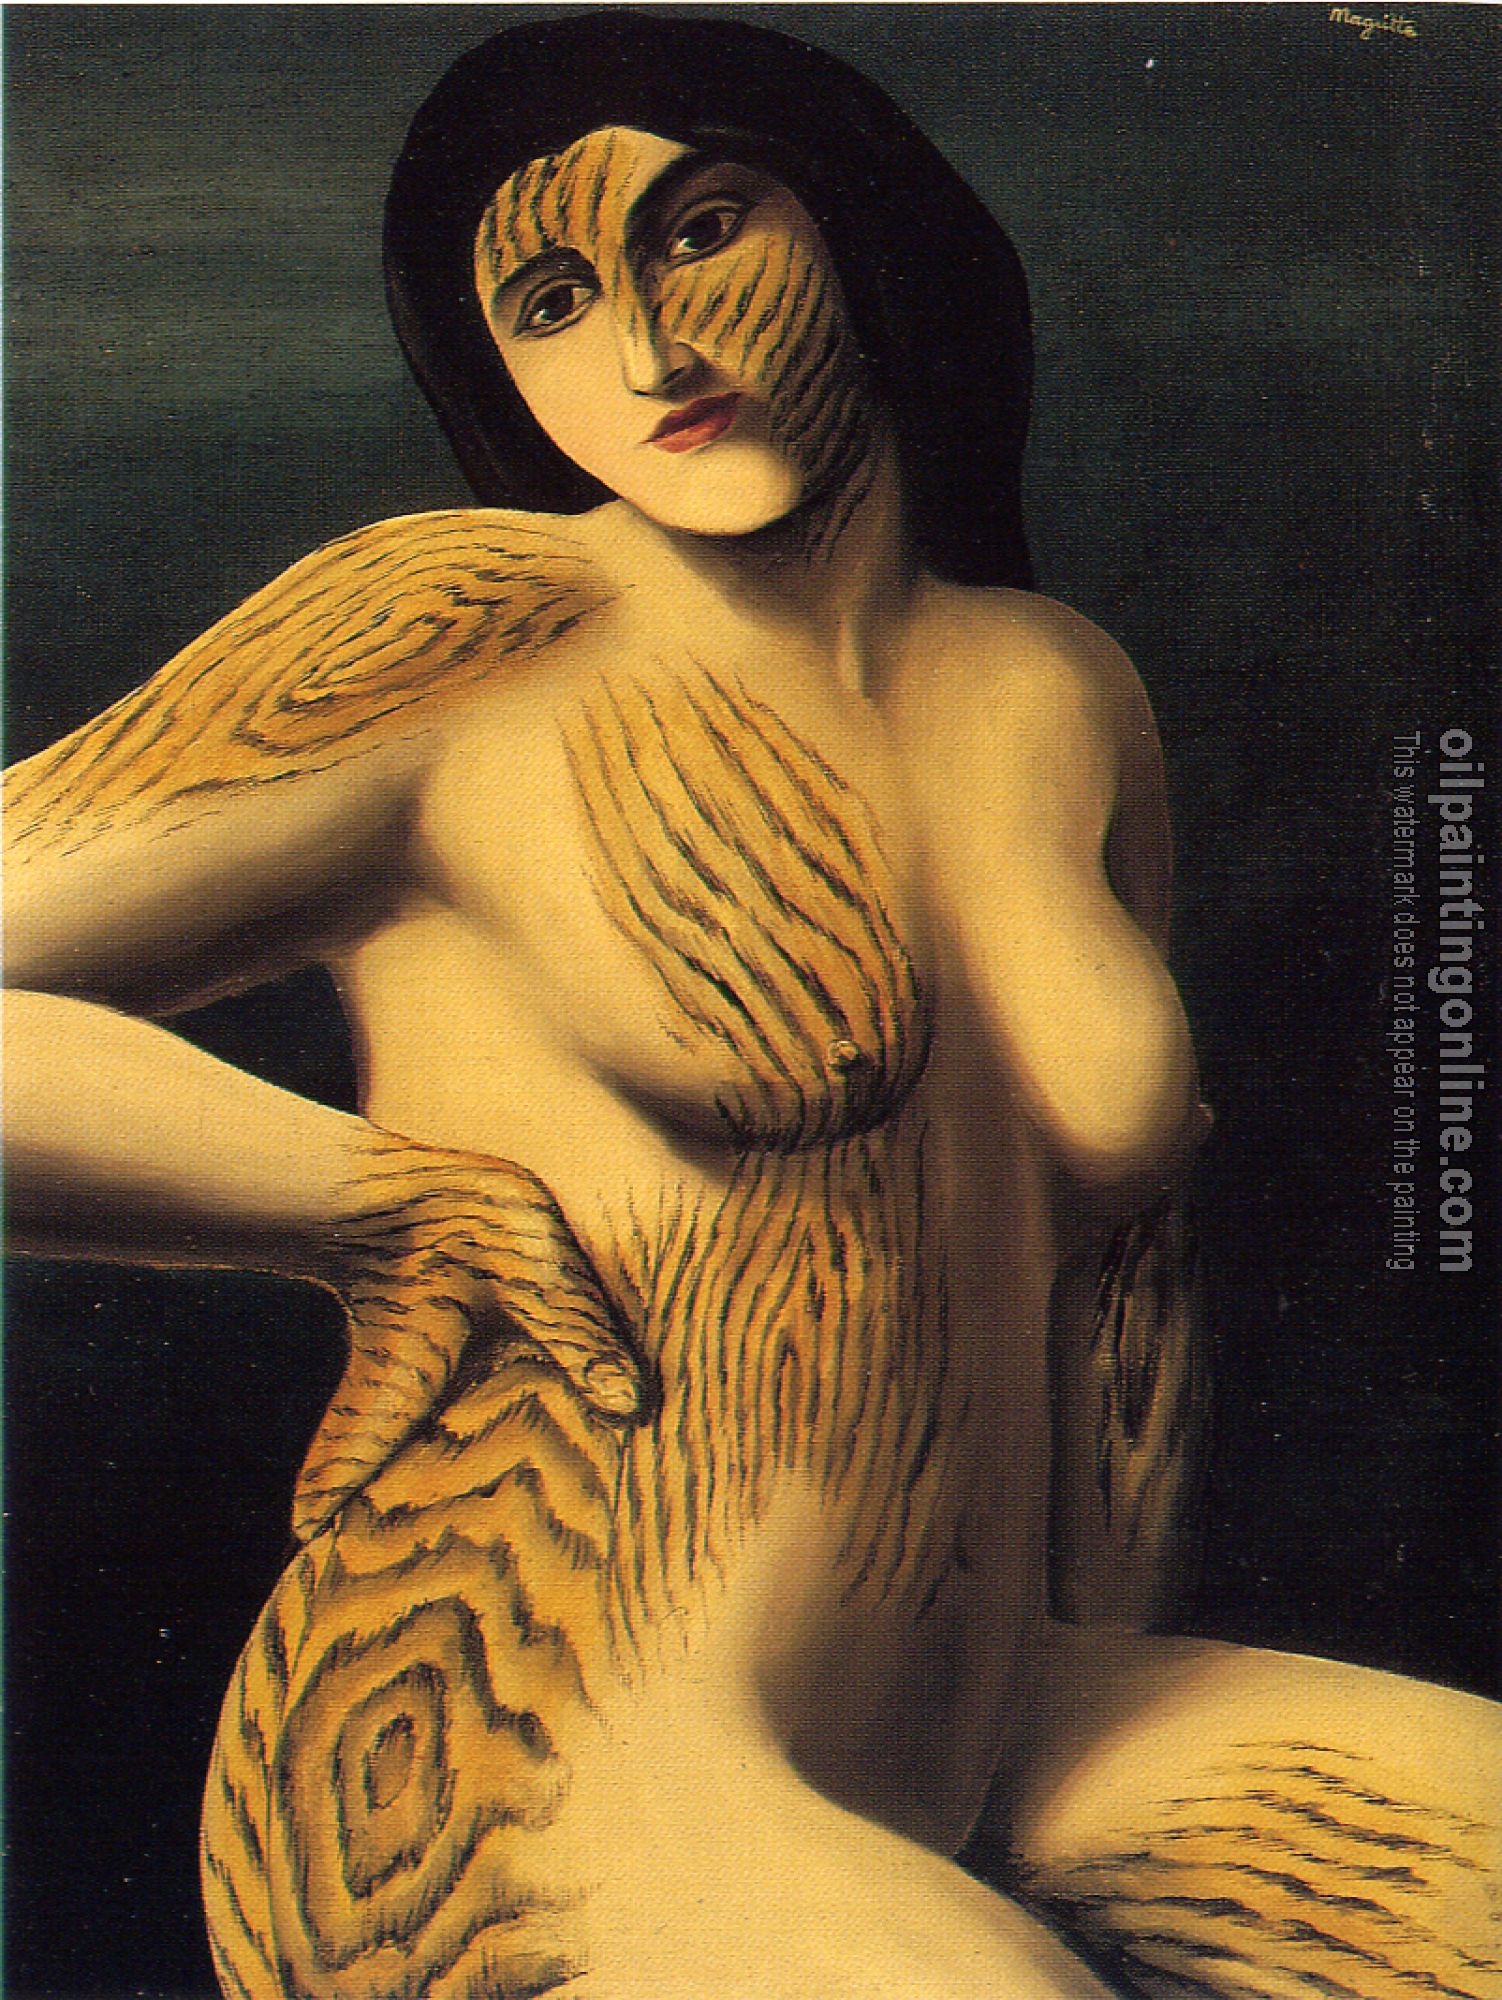 Magritte, Rene - discovery